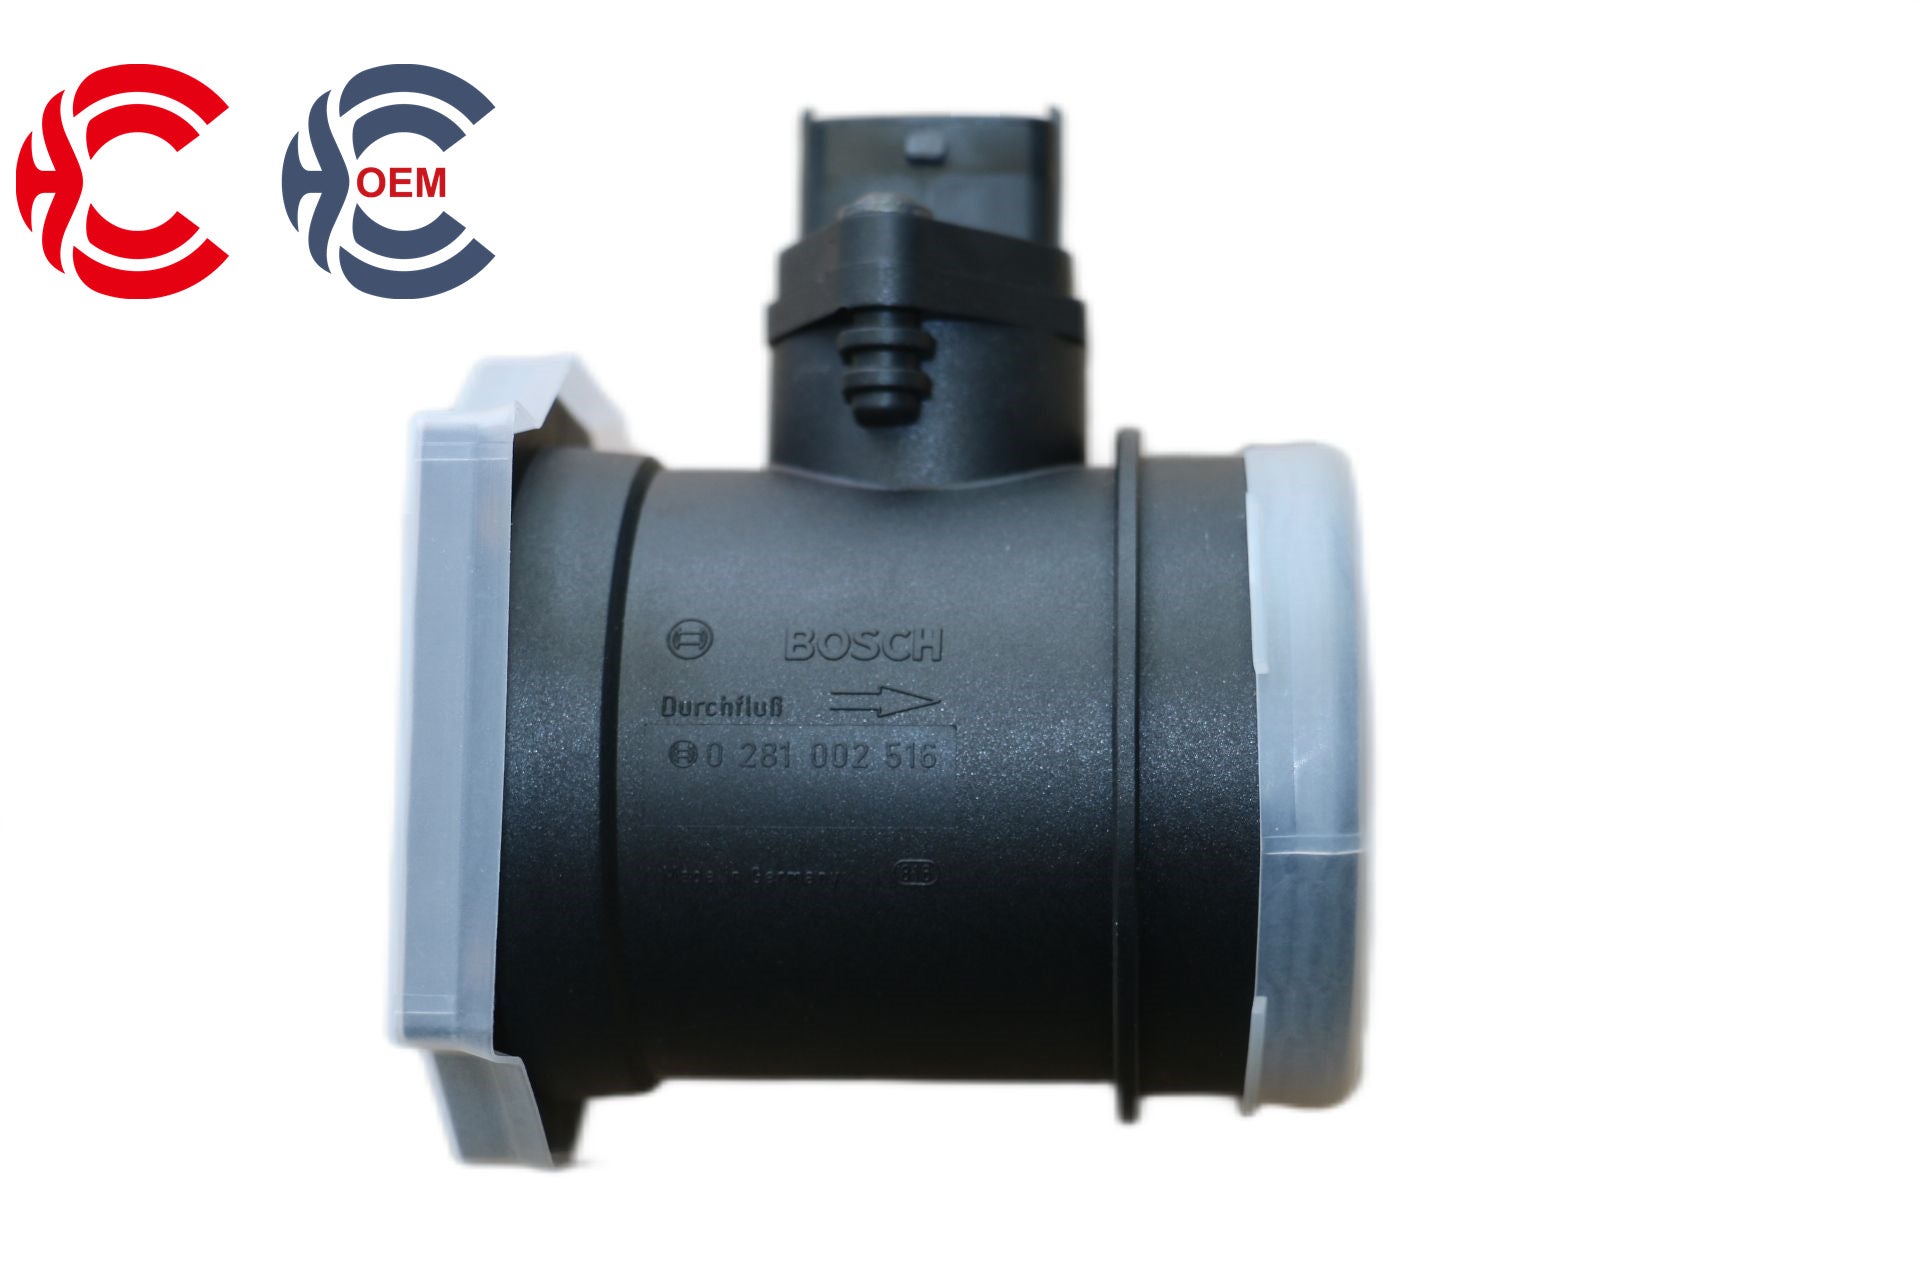 OEM: 0281002516Material: ABSColor: BlackOrigin: Made in ChinaWeight: 200gPacking List: 1* Air Flow Sensor Sensor More ServiceWe can provide OEM Manufacturing serviceWe can Be your one-step solution for Auto PartsWe can provide technical scheme for you Feel Free to Contact Us, We will get back to you as soon as possible.